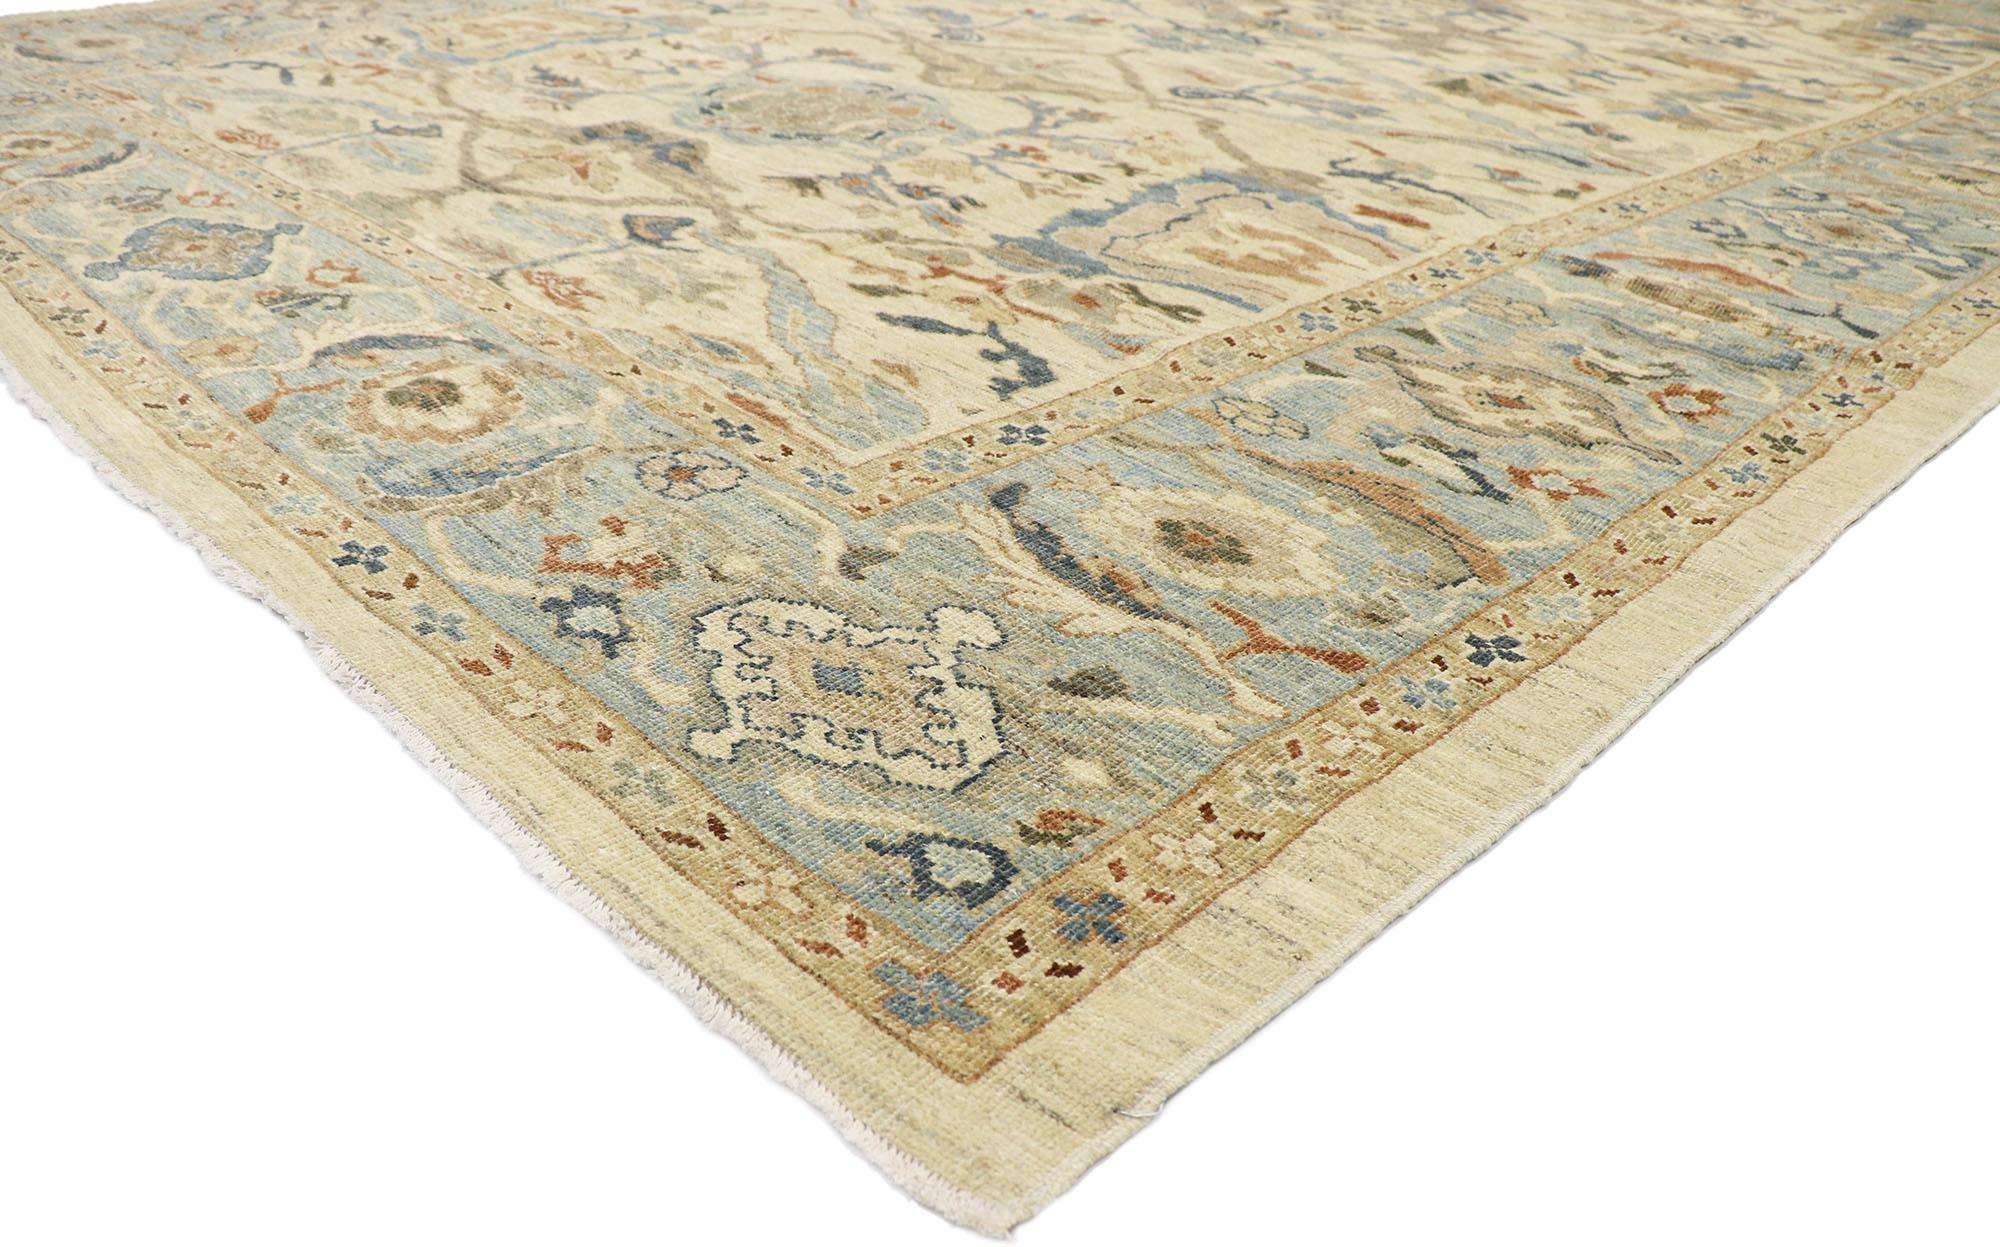 60898 new contemporary Persian Sultanabad rug with Transitional Modern style 10'04 x 14'00. This hand-knotted wool contemporary Persian Sultanabad rug features an all-over botanical lattice pattern spread across an abrashed tan field. An array of